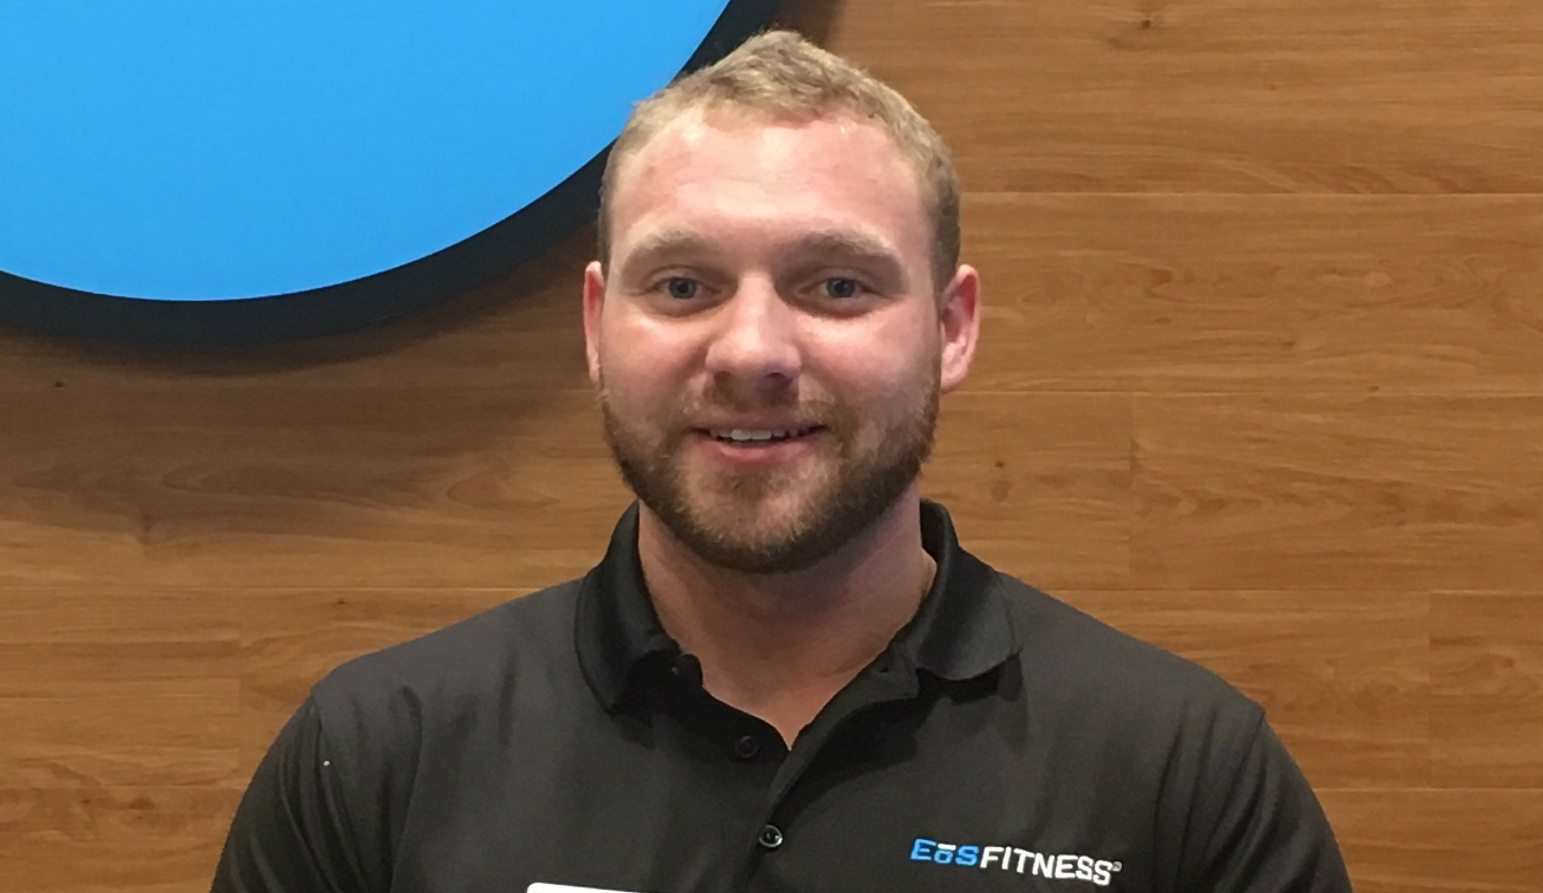 General Manager of EoS Fitness: Mesa - Greenfield/US 60